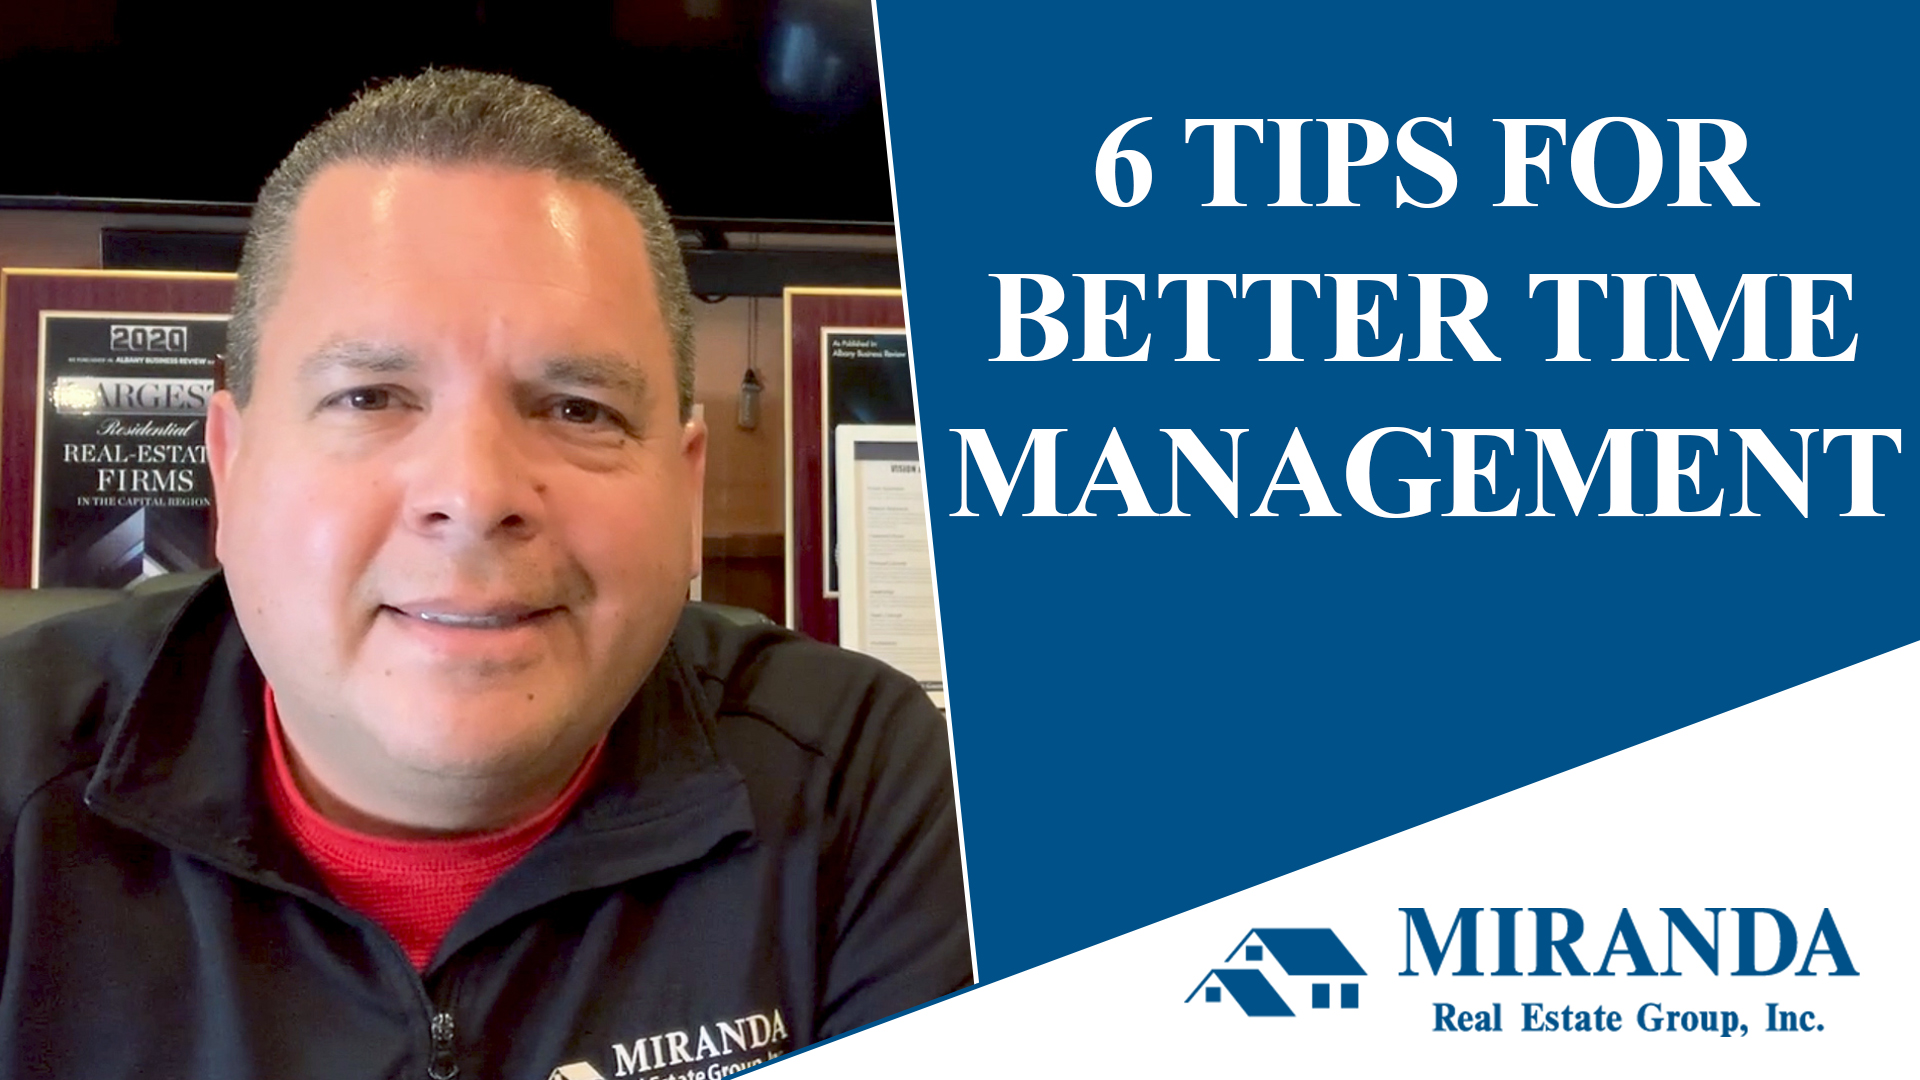 Better Time Management in 6 Simple Steps